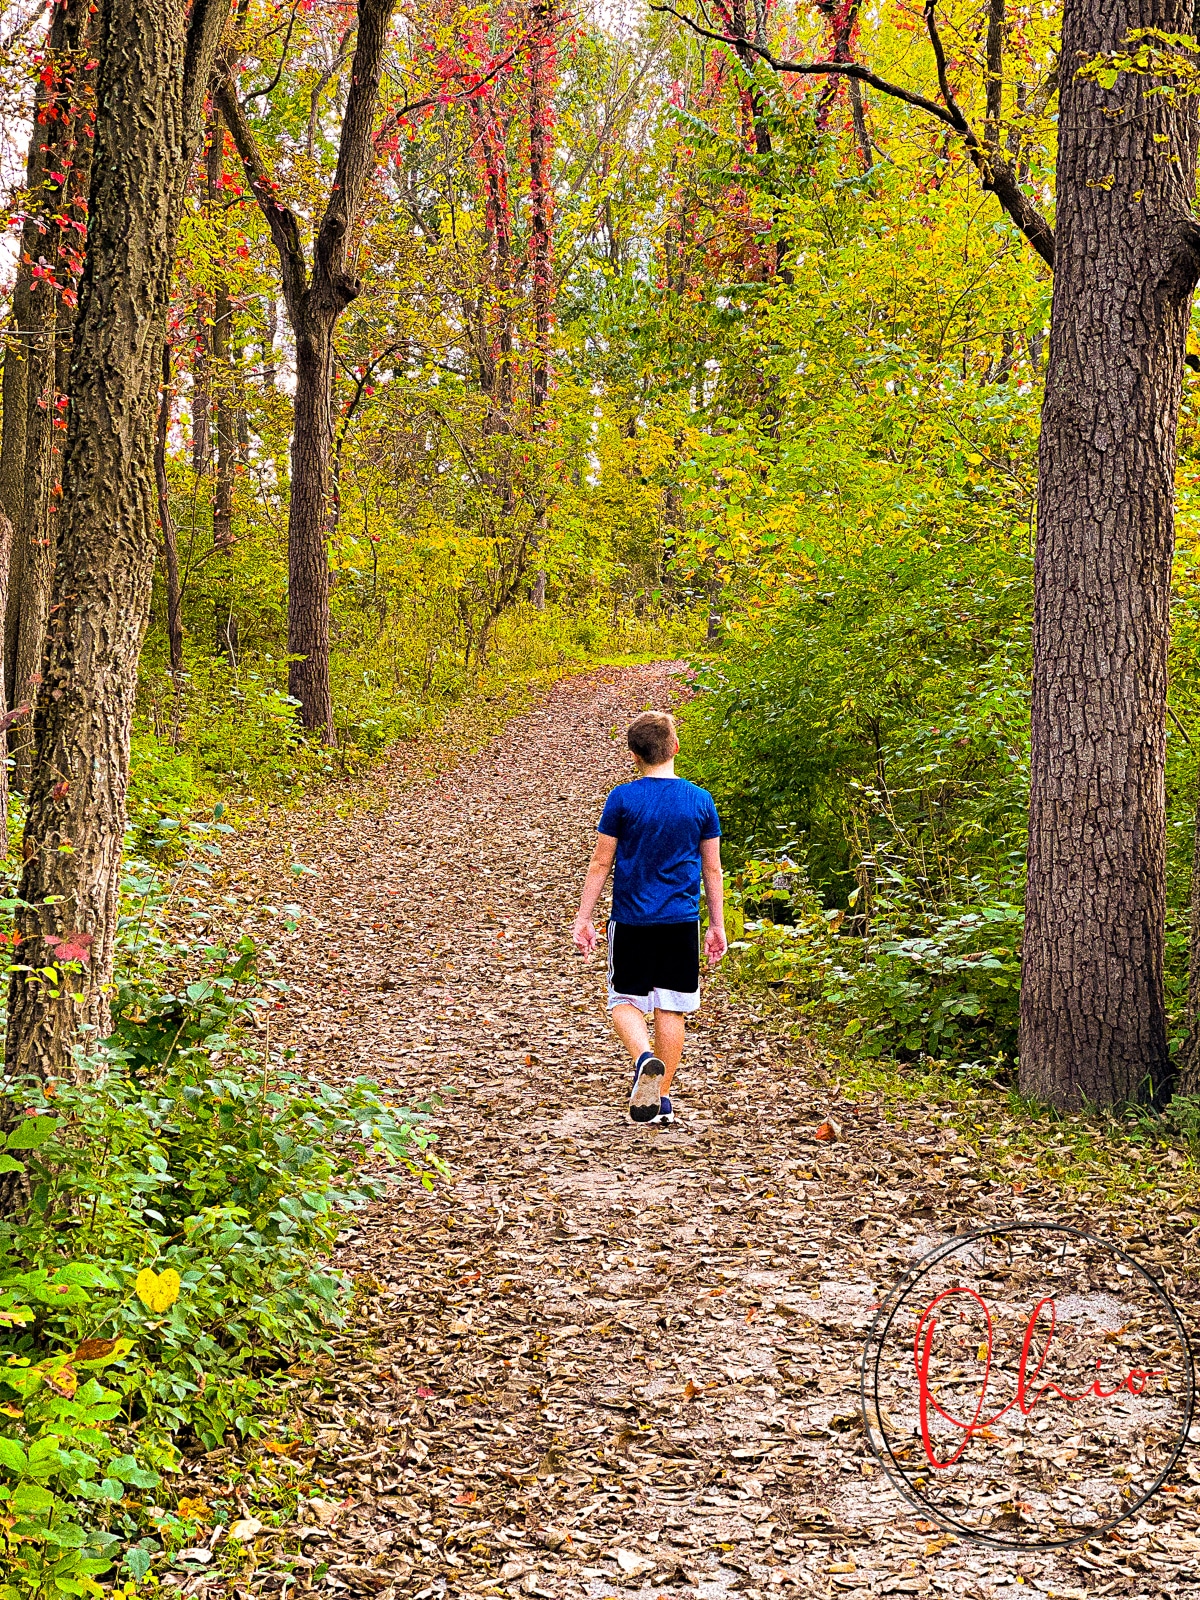 dirt path covered with dead fallen leaves, wooden tree leaves starting to change color and brown tree trunks. Boy with blue shirt and black shorts walking away from camera Photo credit: Cindy Gordon of VisitOhioToday.com